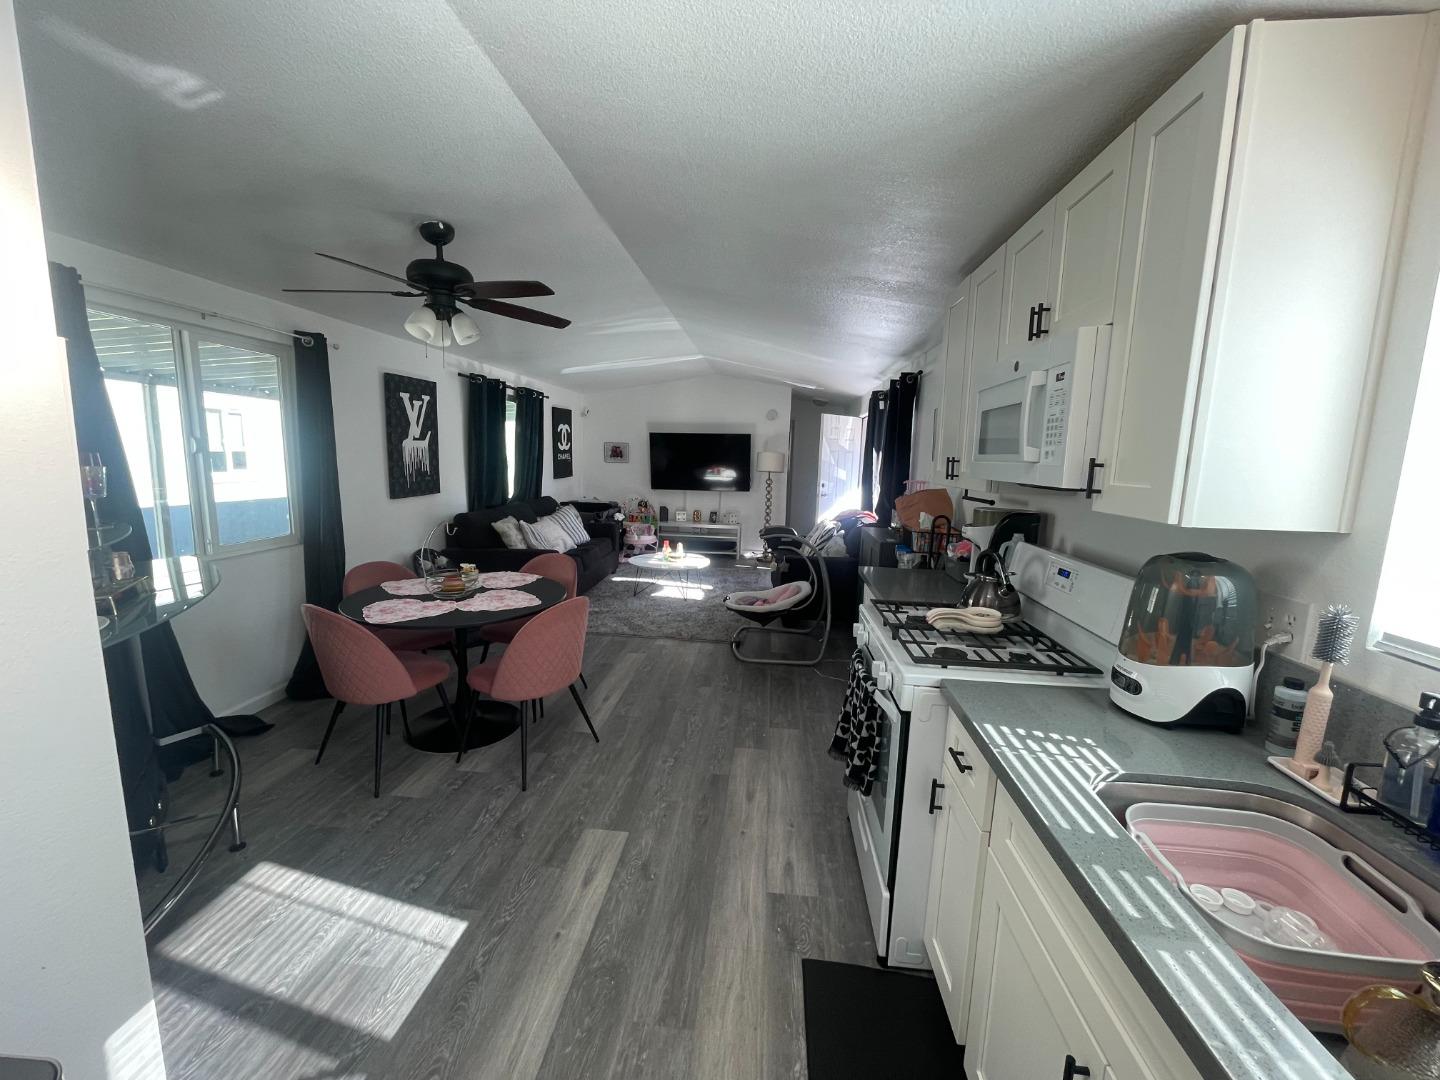 a open kitchen with stainless steel appliances granite countertop a sink dishwasher stove a table and chairs with wooden floor